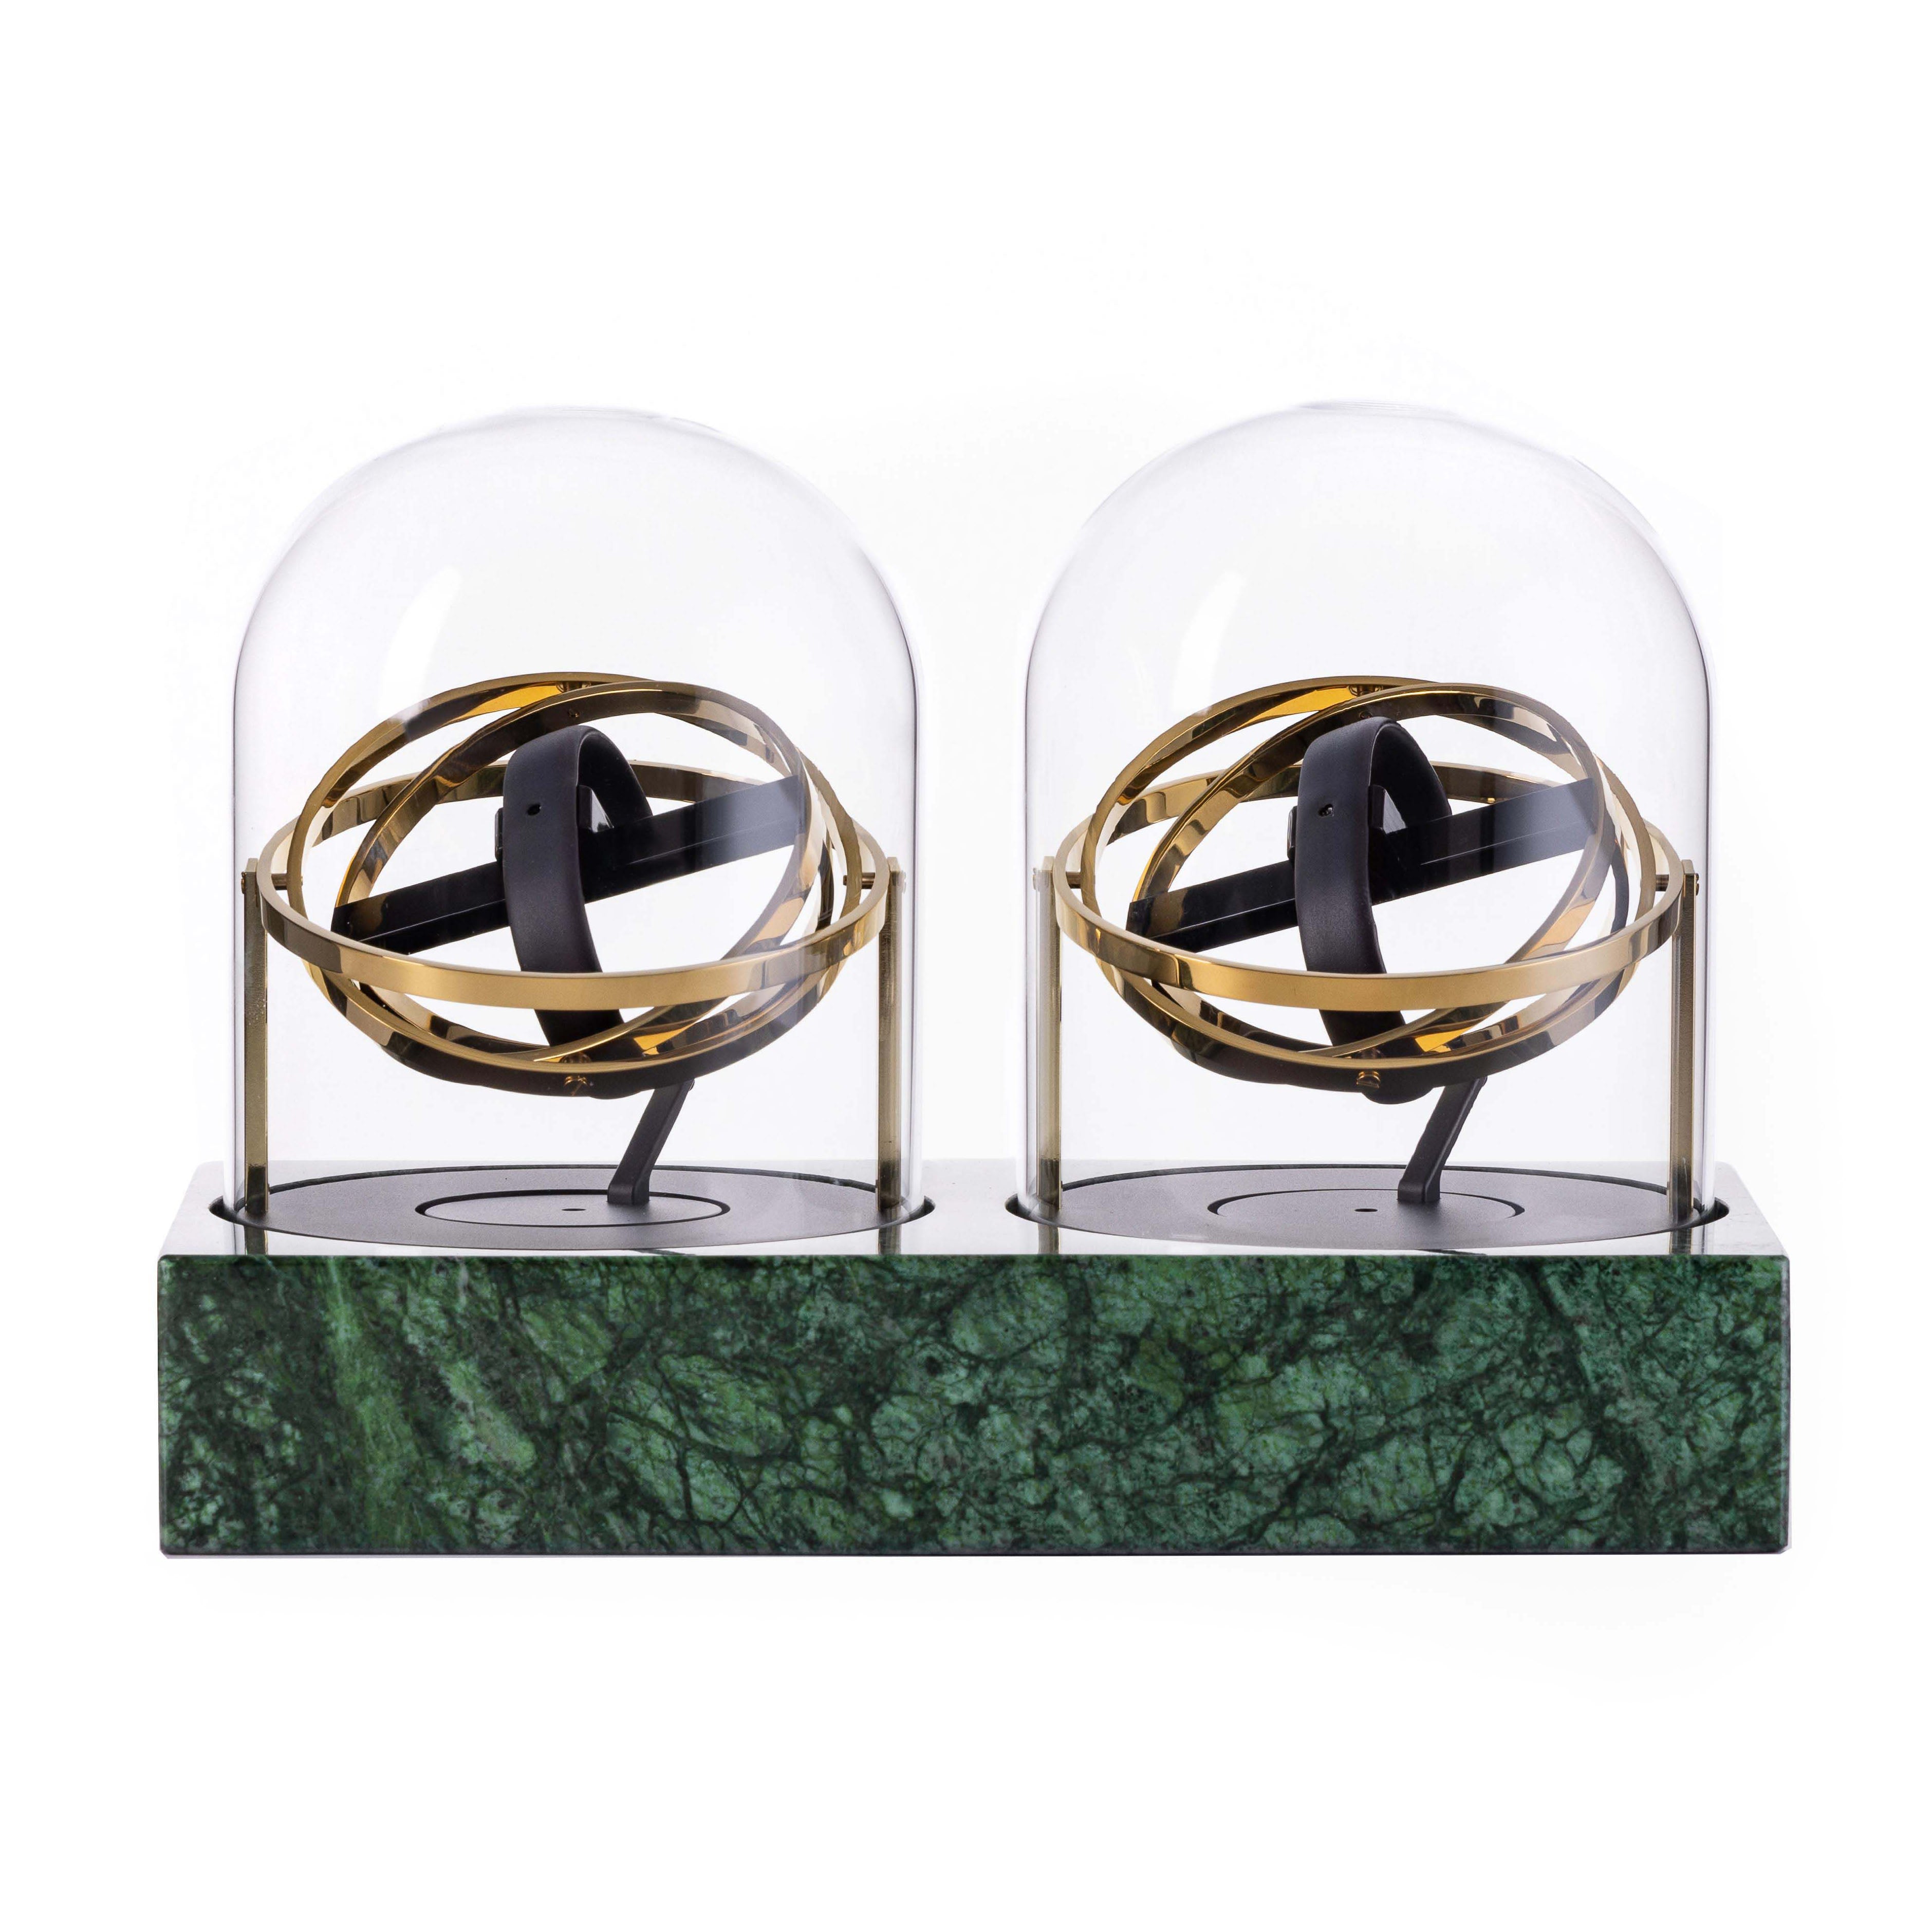 Double Watch Winder - Astronomia X1 Gold - Green Marble Edition